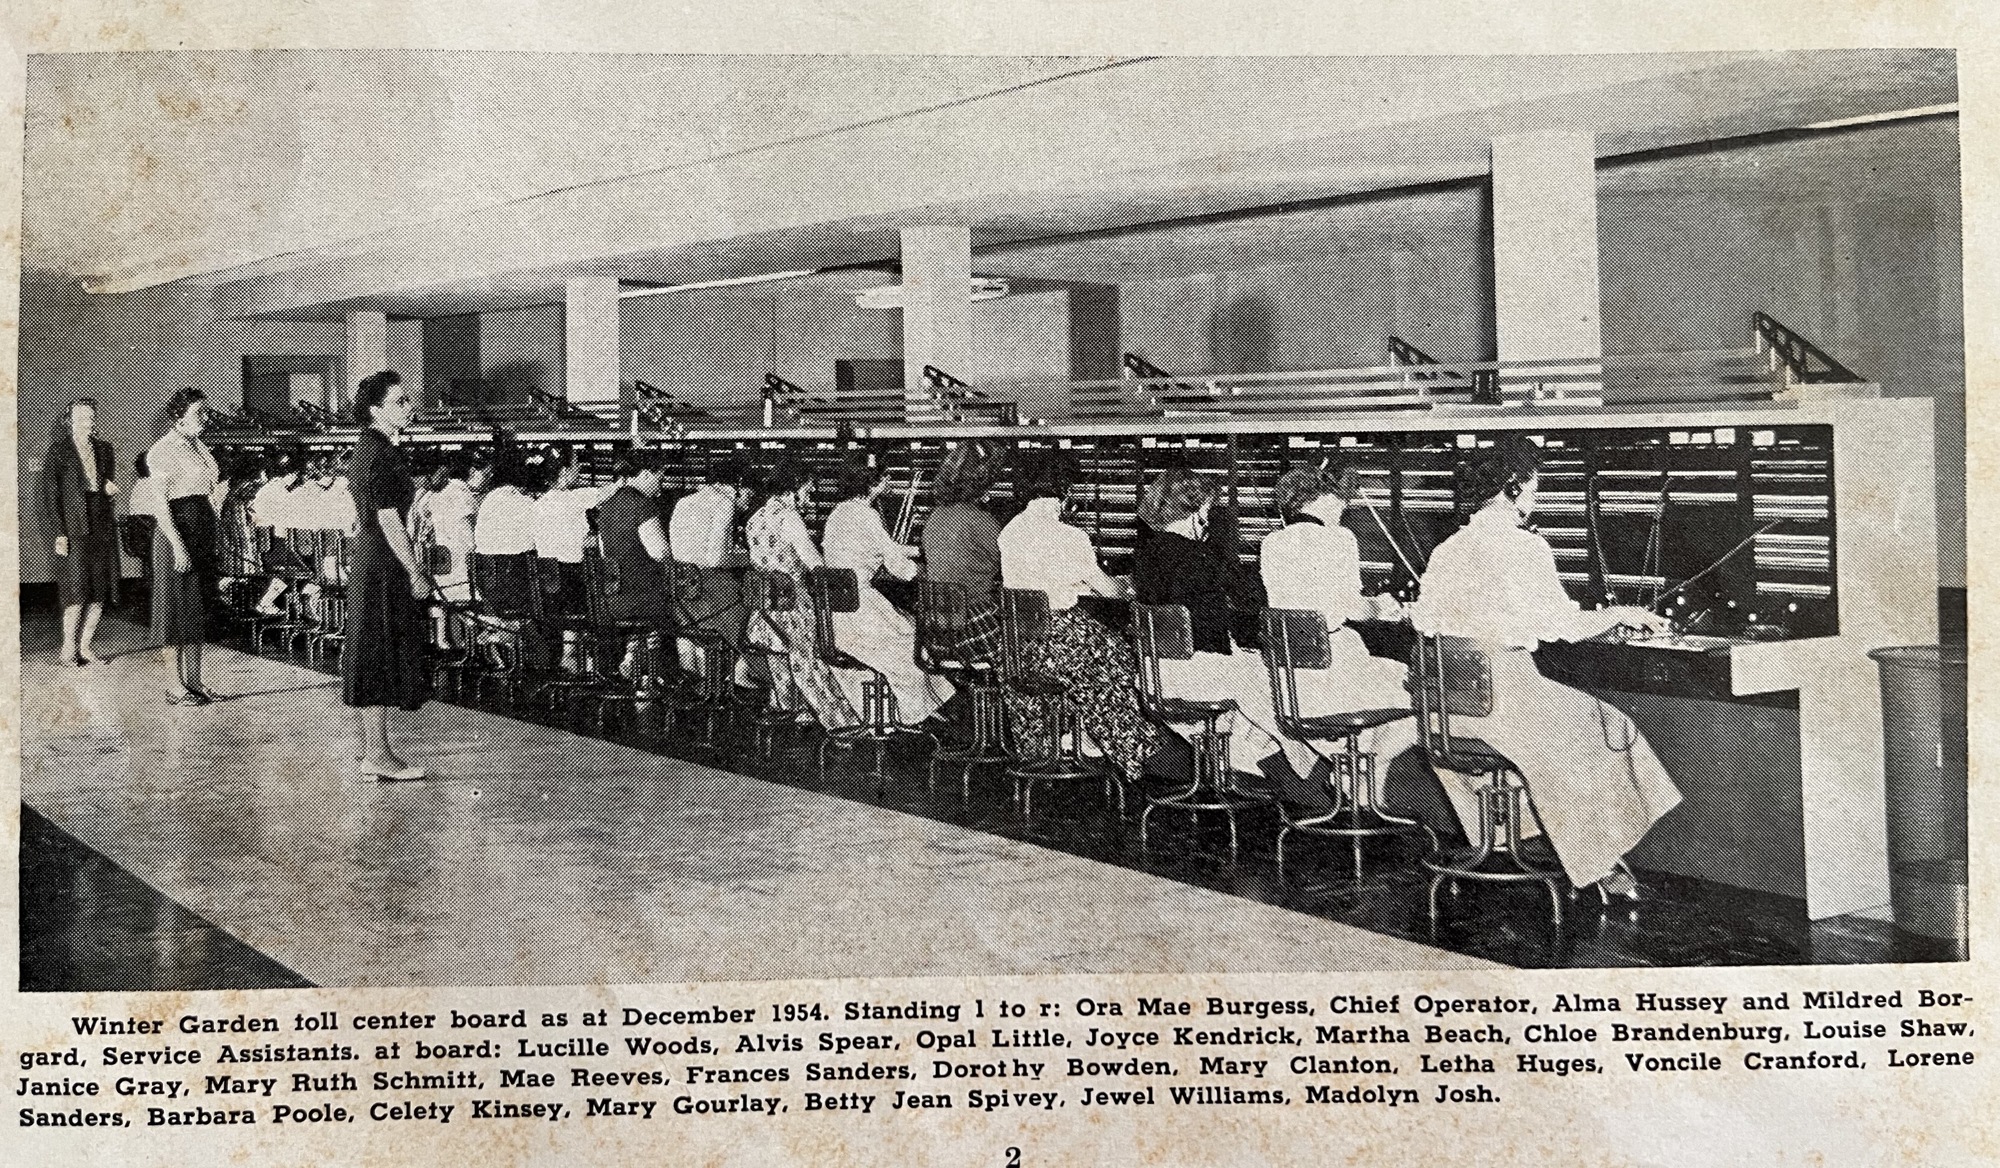 Florida Telephone News newsletters informed employees at the company’s various call centers. In December 1954, a photo ran featuring the women at the Winter Garden toll center board.